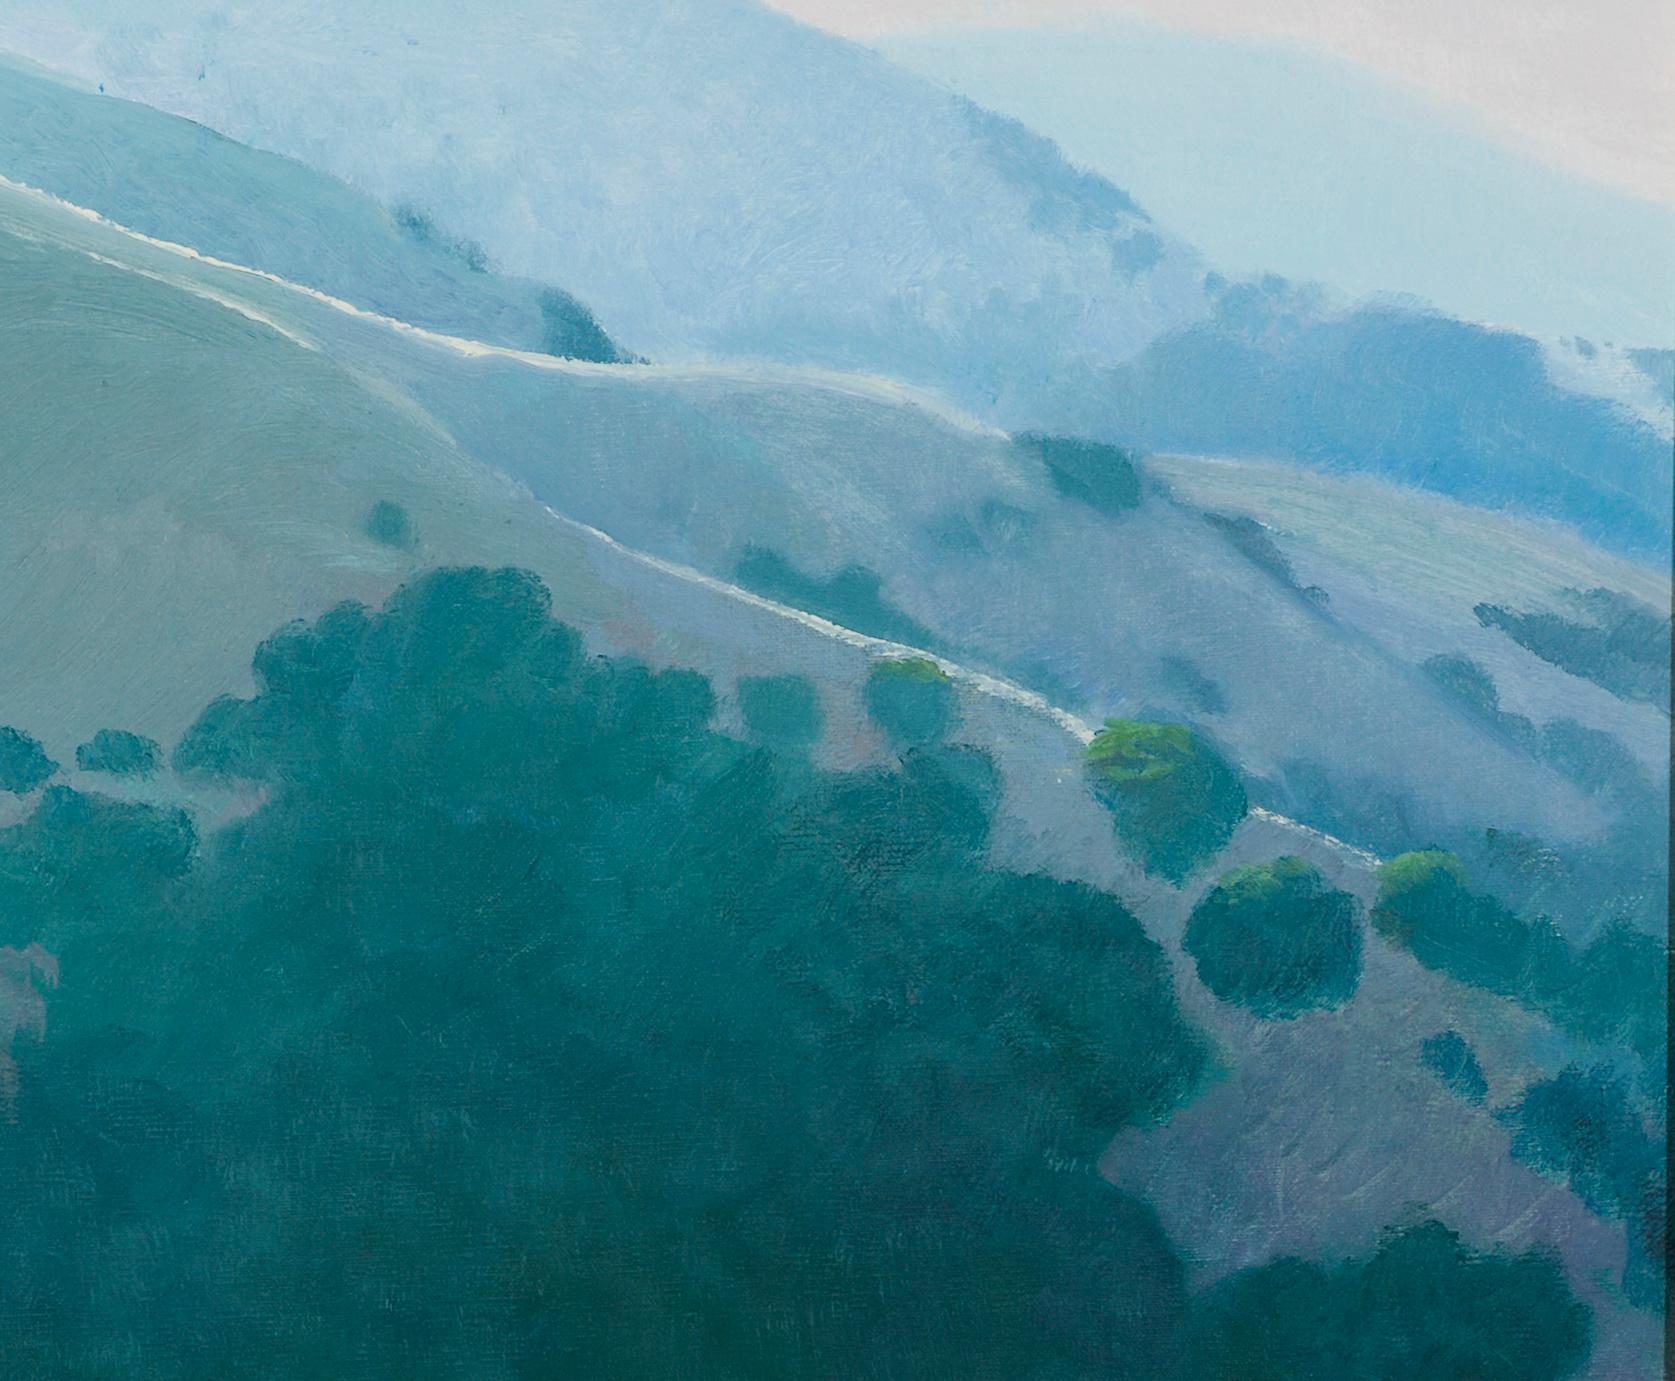 Painted Lifting Fog, Californian Landscape, Armand Cabrera Oil on Canvas